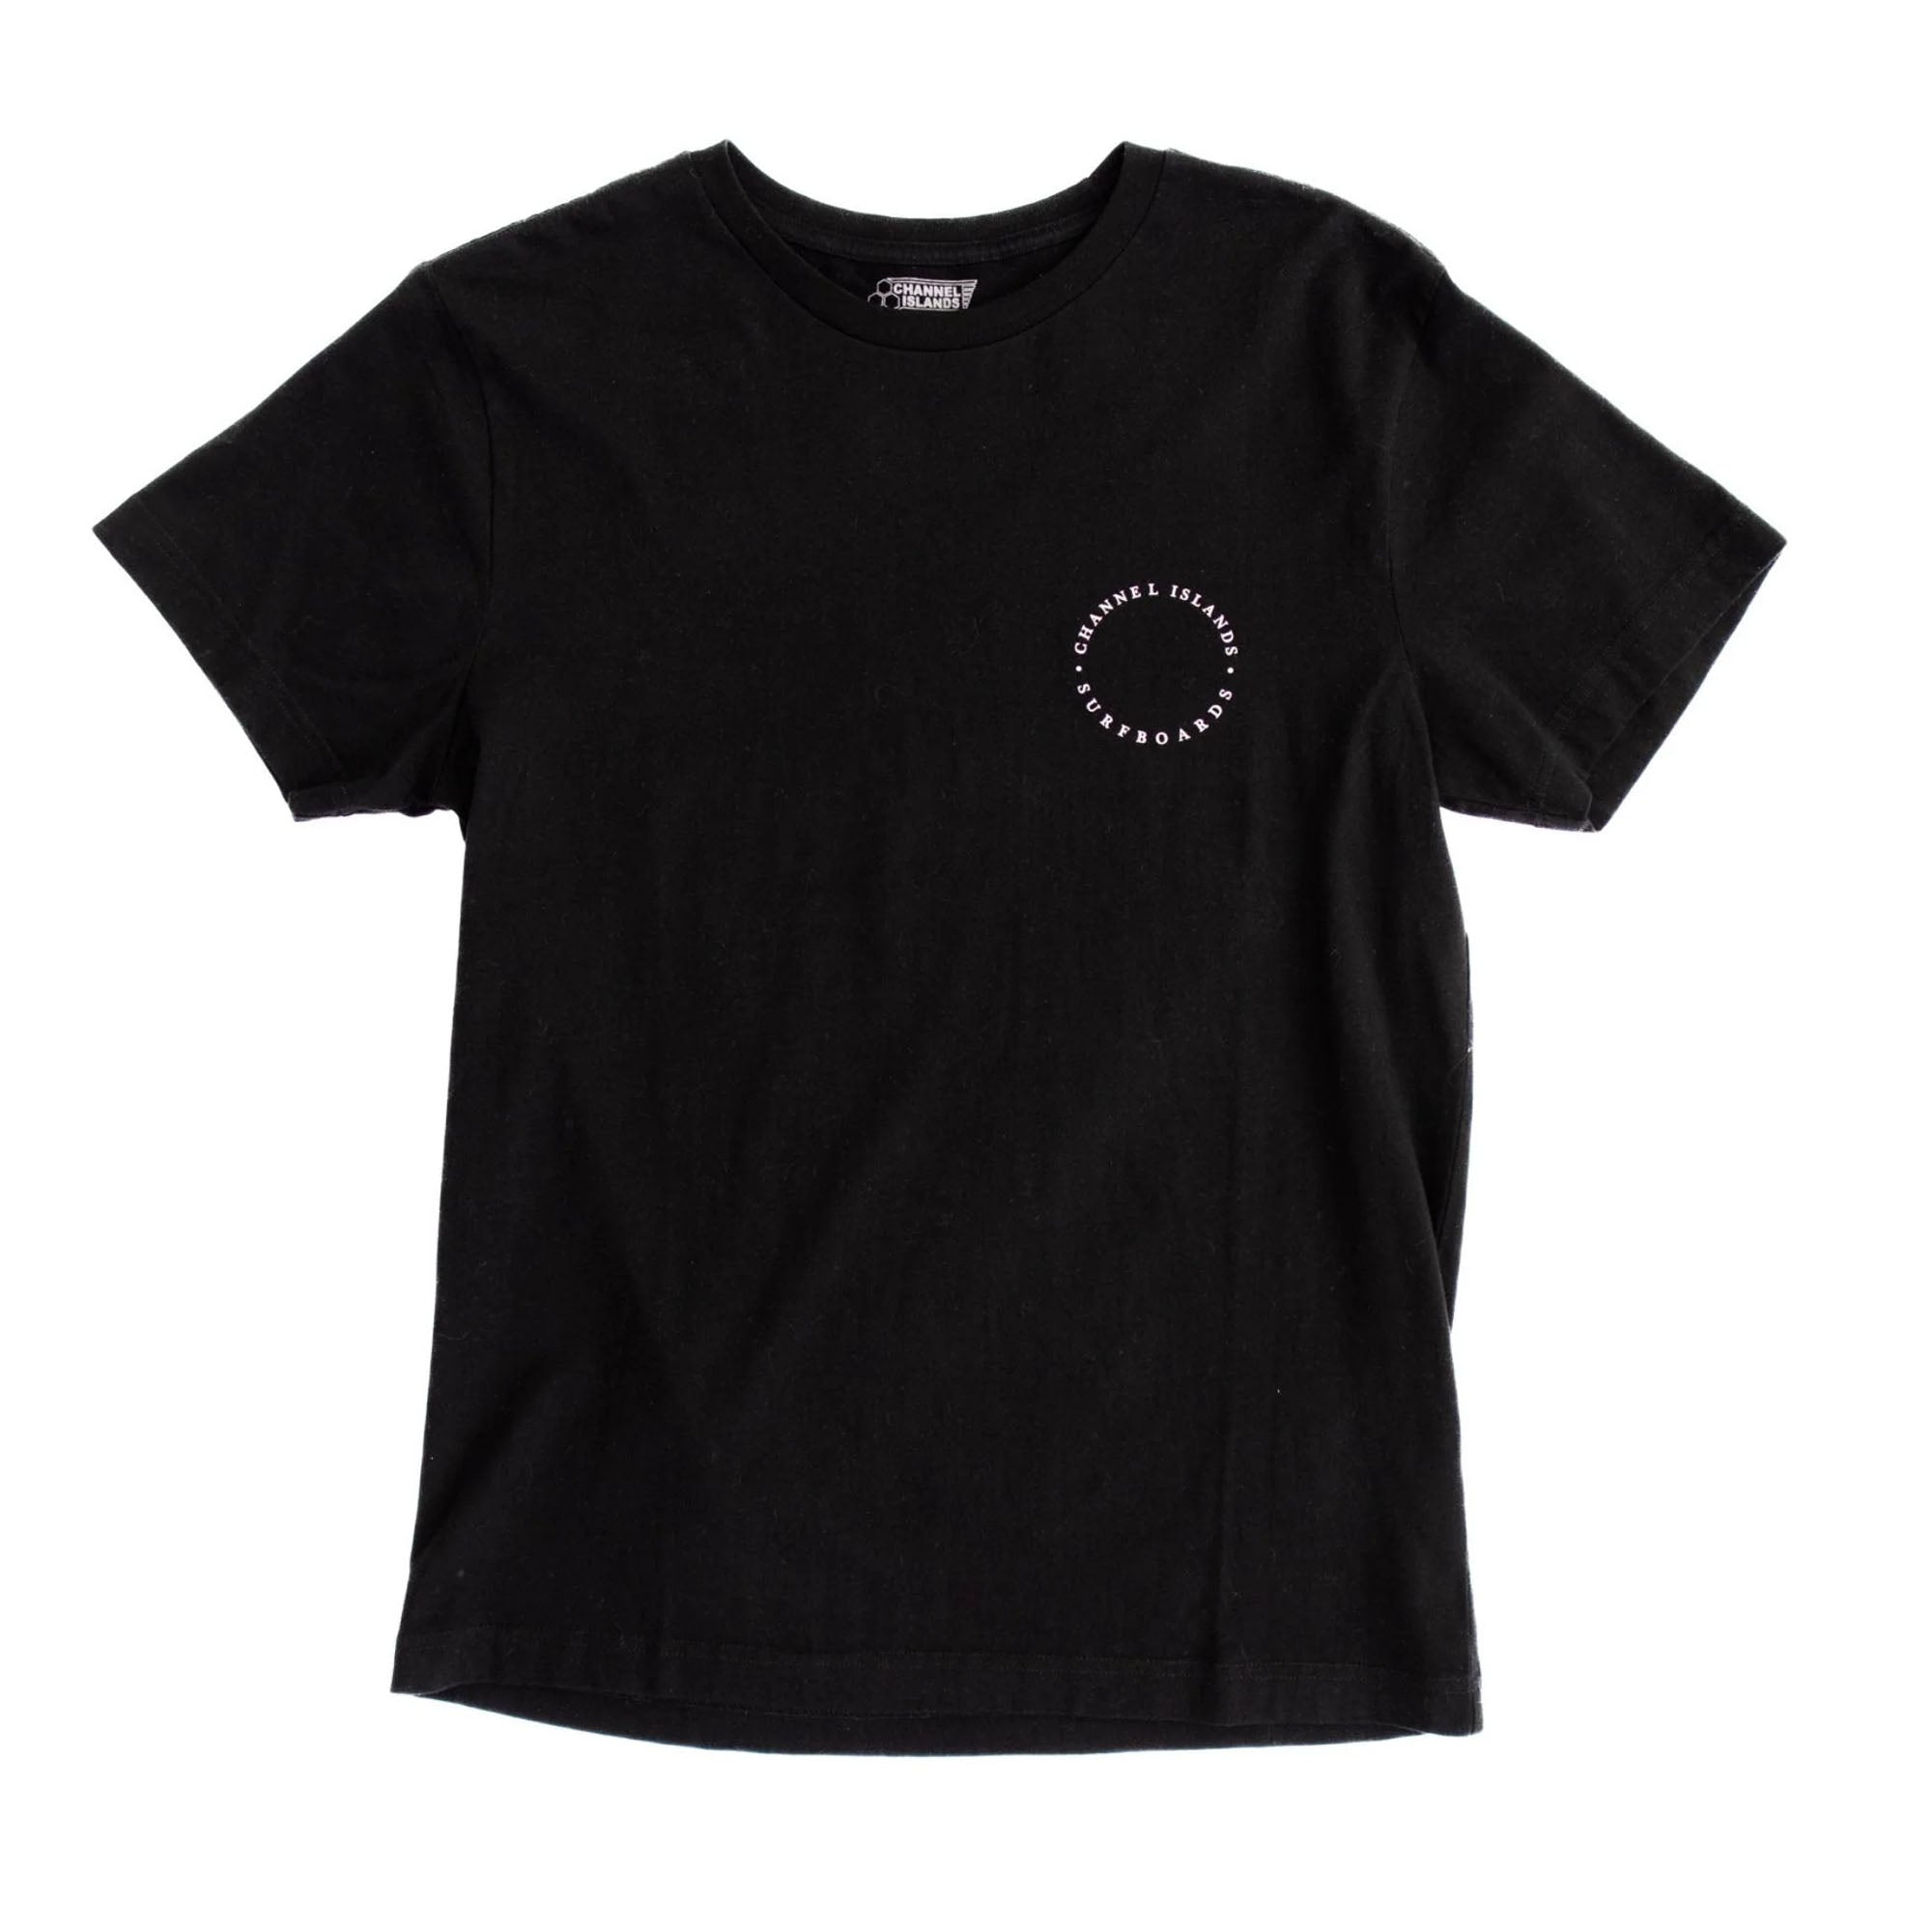 Channel Islands Hex Circle 2.0 Youth Boy's S/S T-Shirt